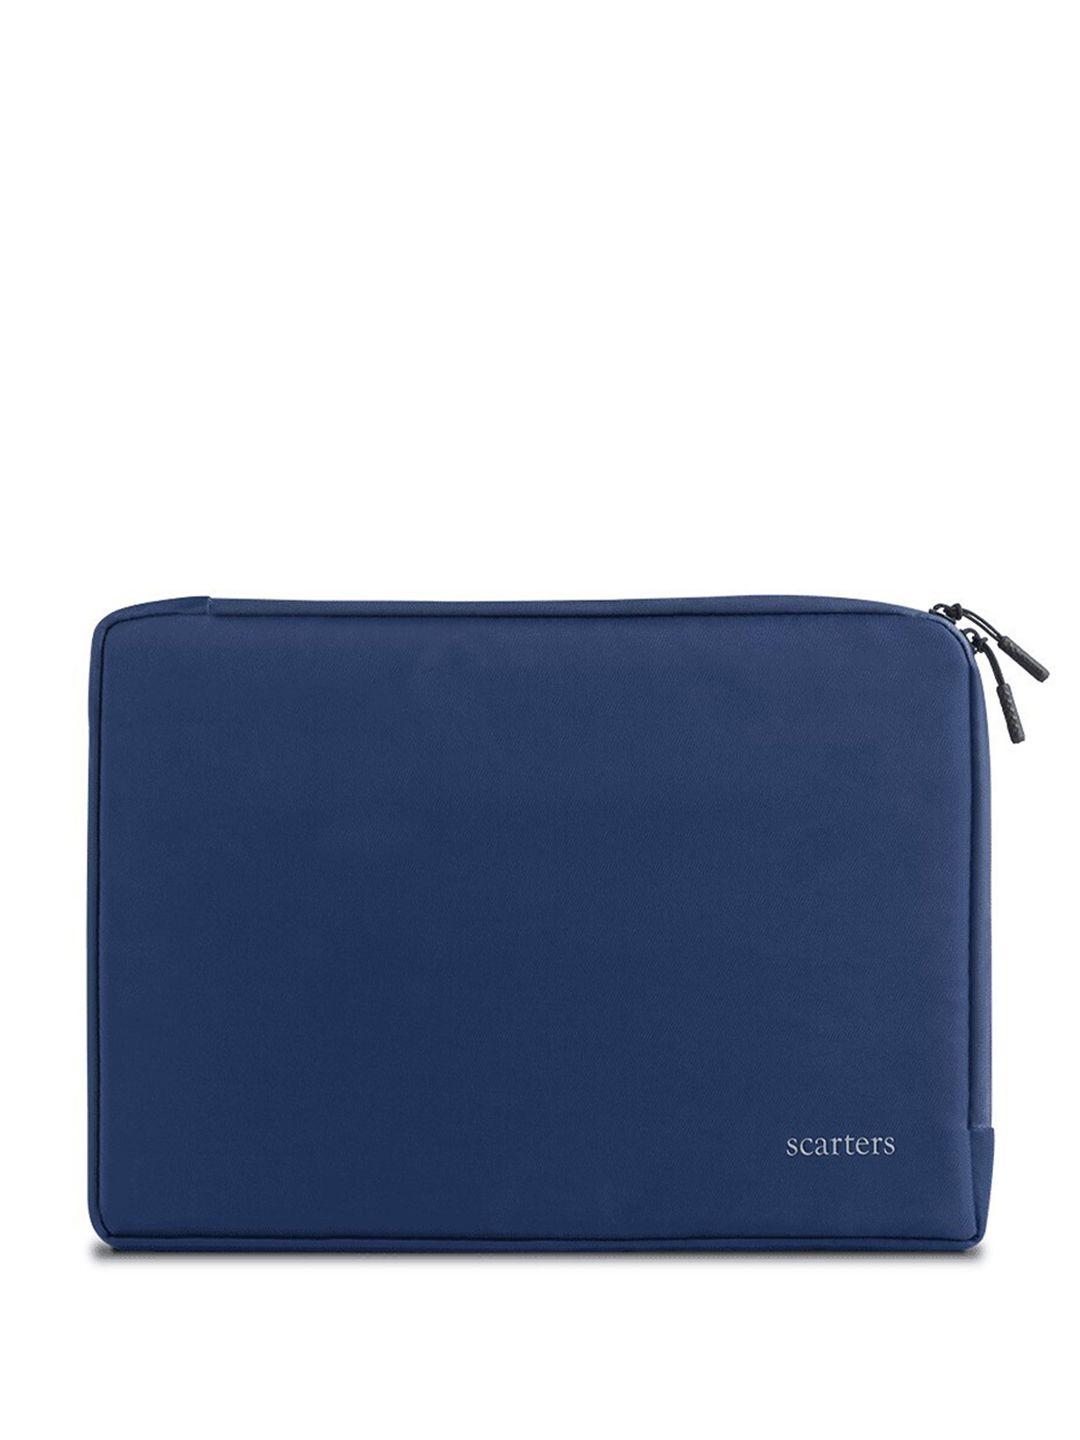 scarters unisex laptop sleeve up to 14 inch